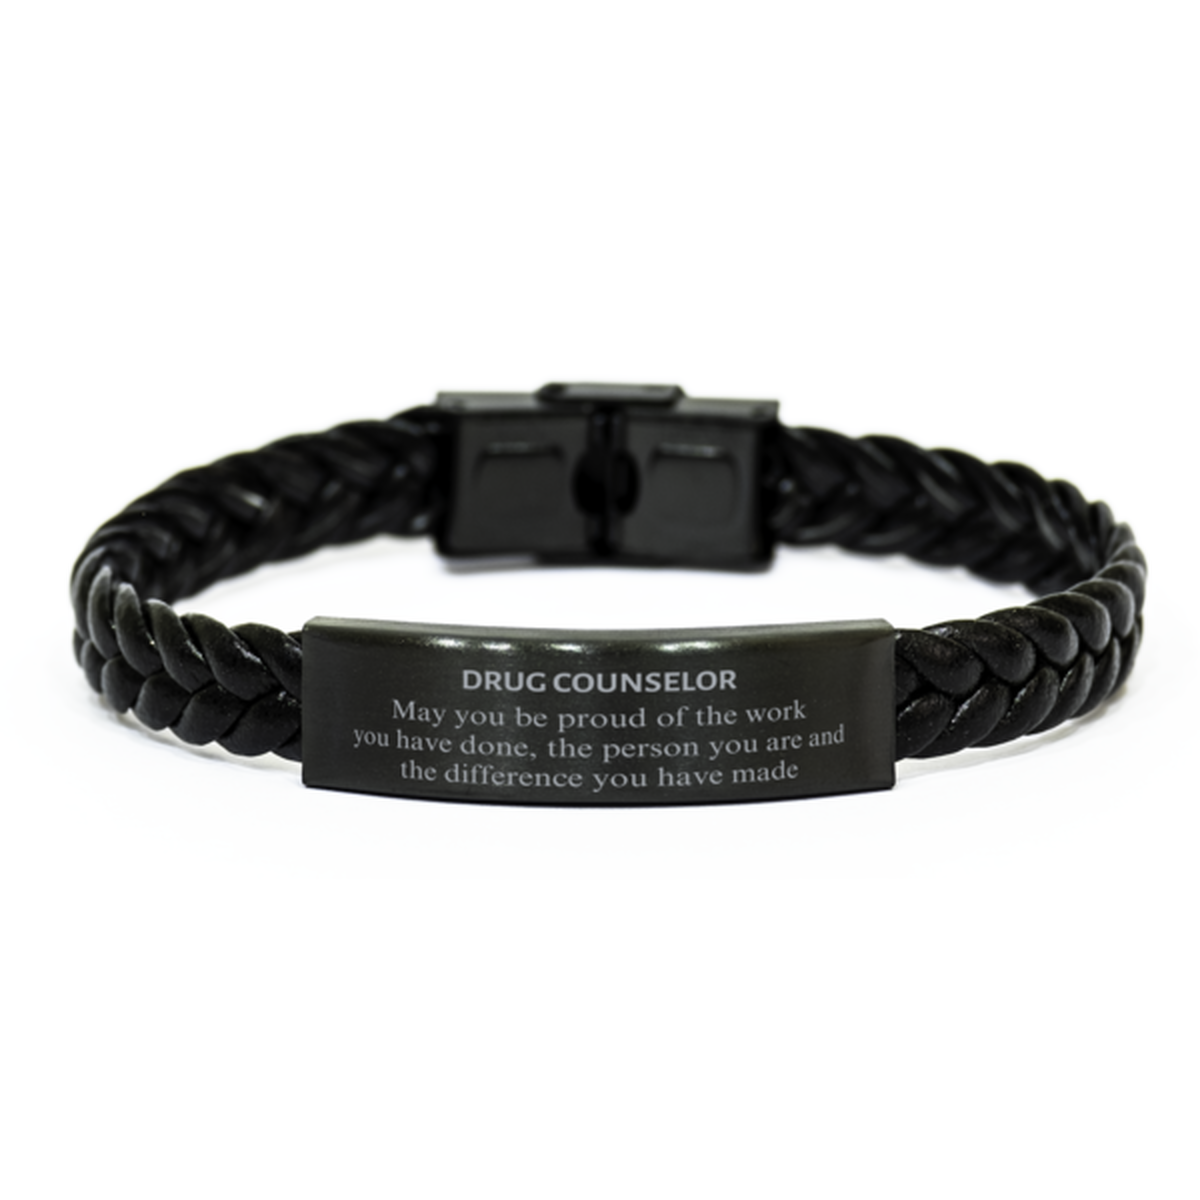 Drug Counselor May you be proud of the work you have done, Retirement Drug Counselor Braided Leather Bracelet for Colleague Appreciation Gifts Amazing for Drug Counselor